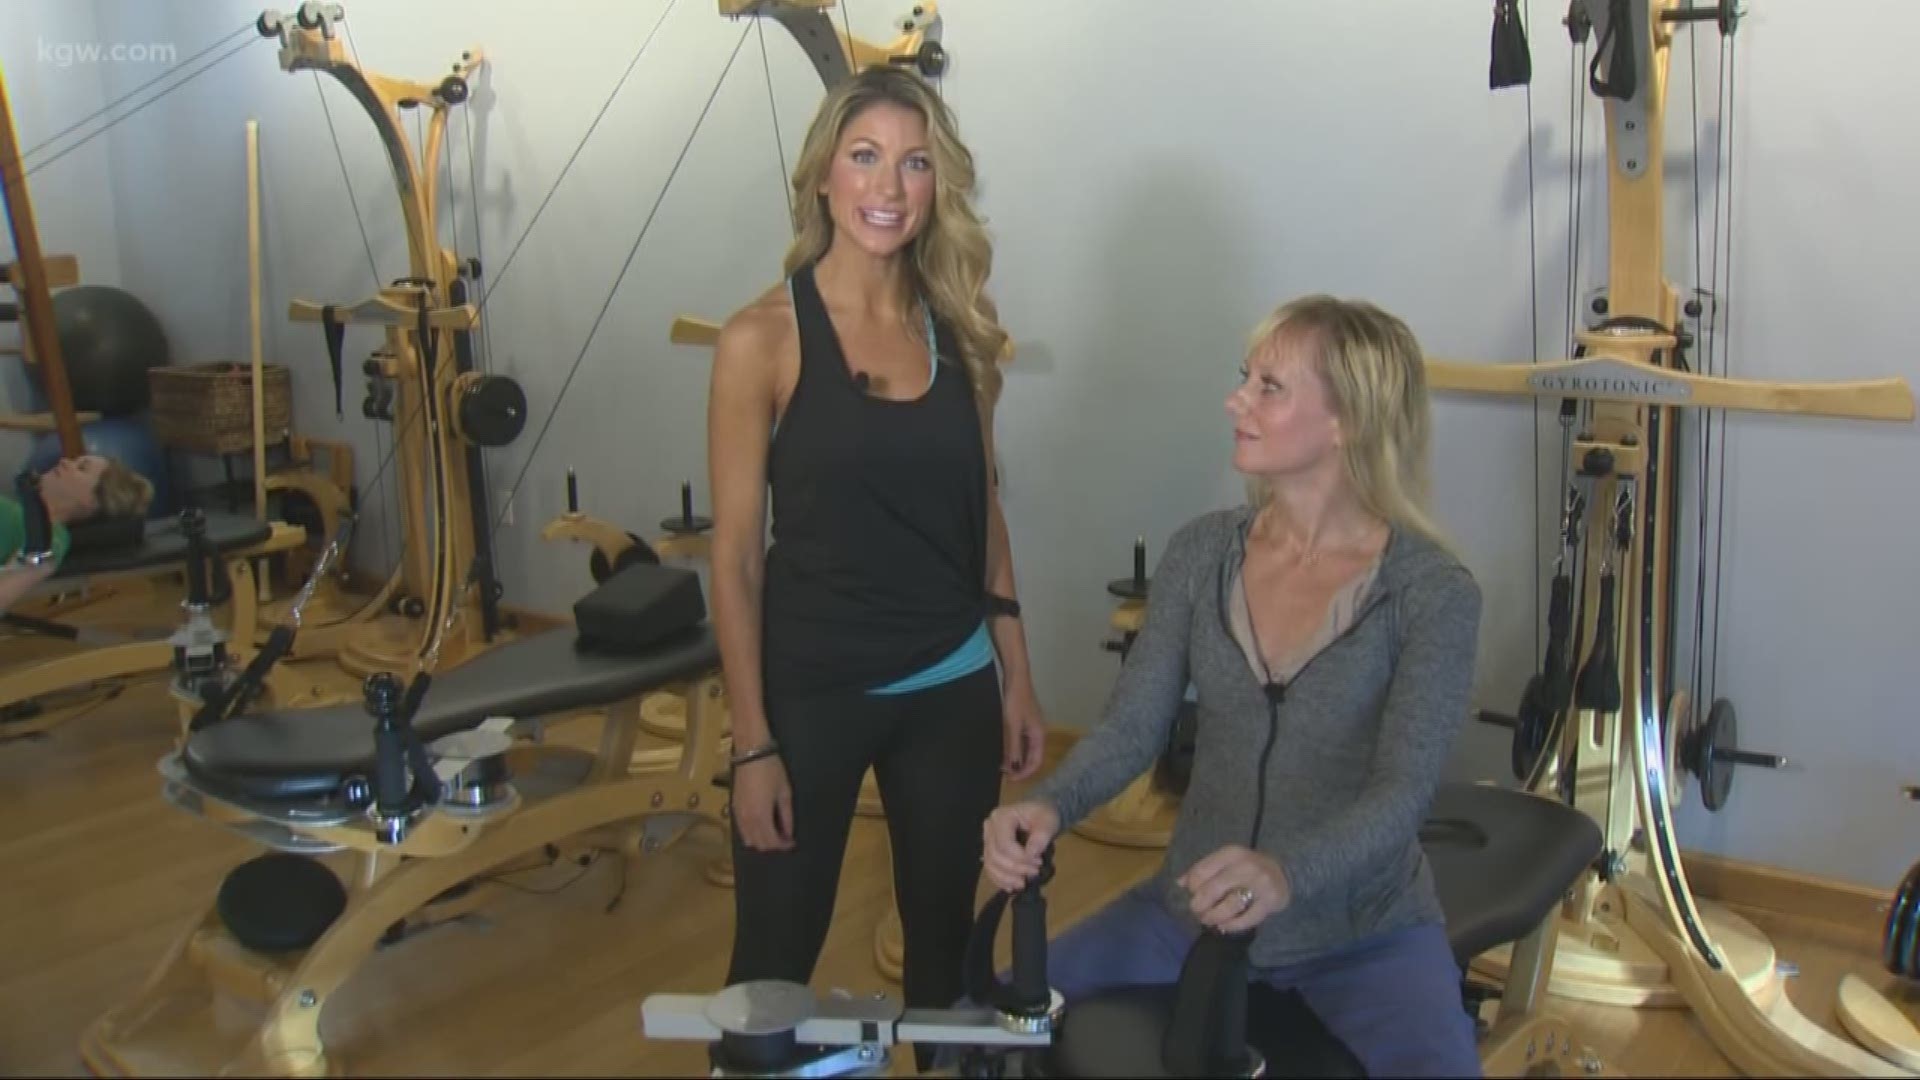 ELEMENTS® Accessories for Pilates and GYROTONIC® studios